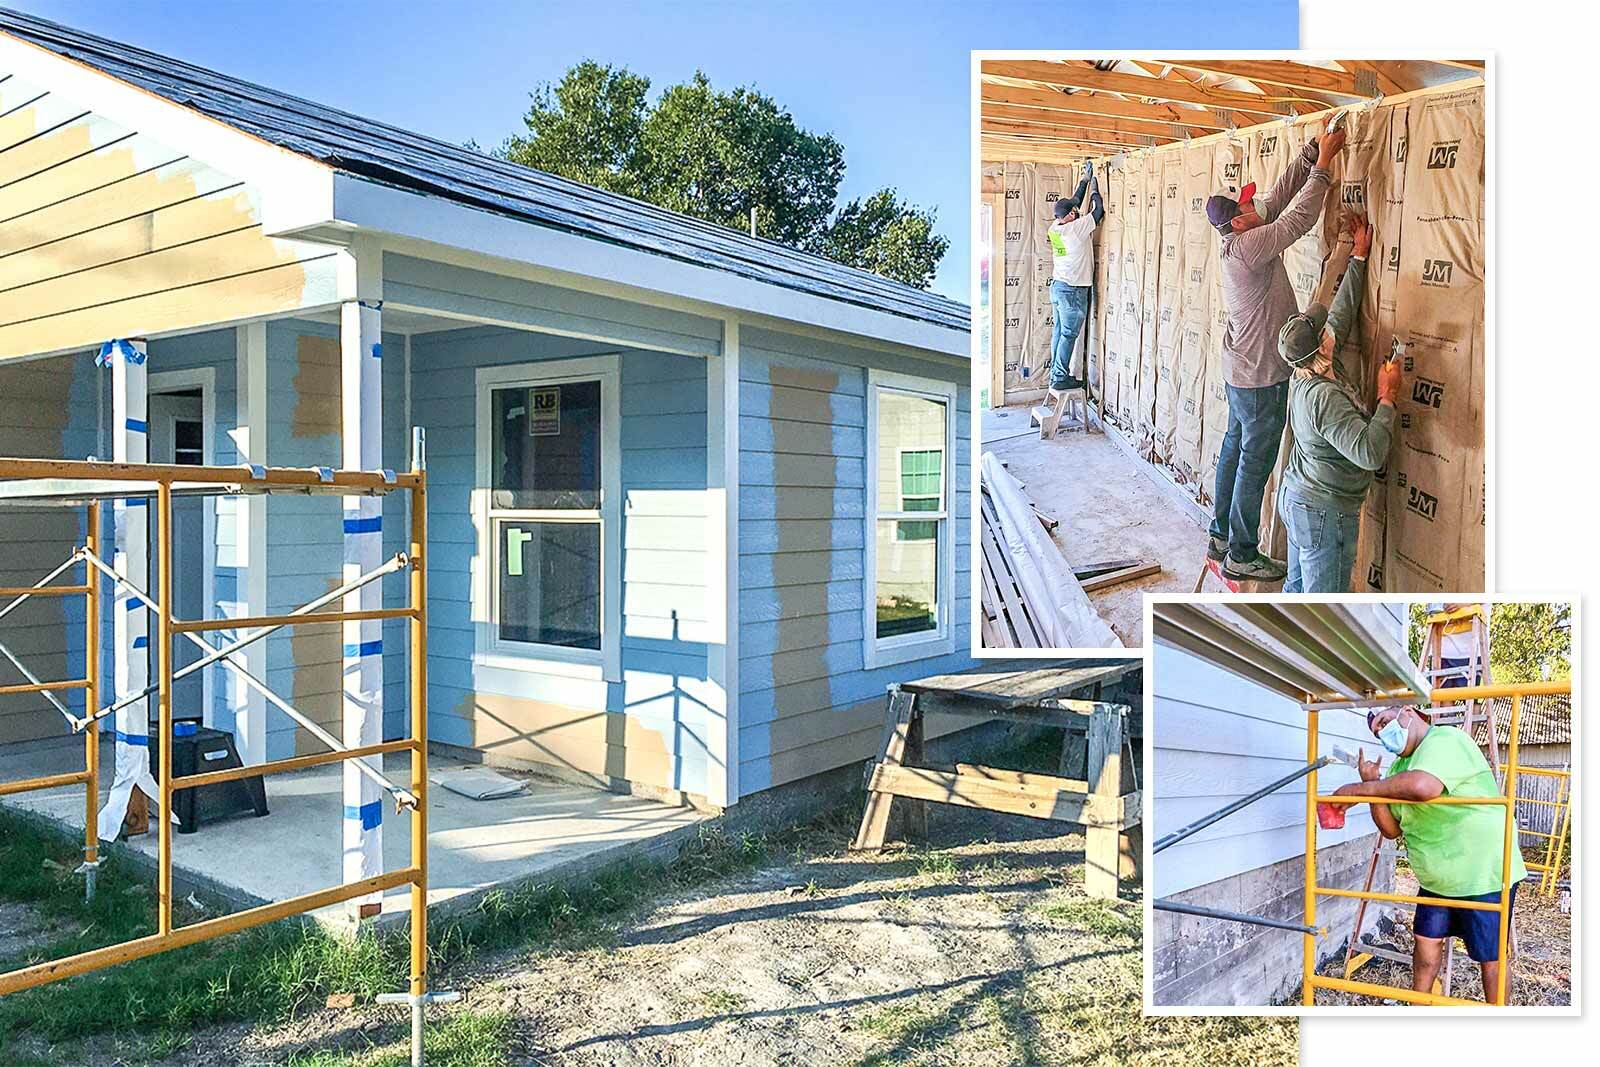 Photos of habitat build, and associates painting and installing insulation